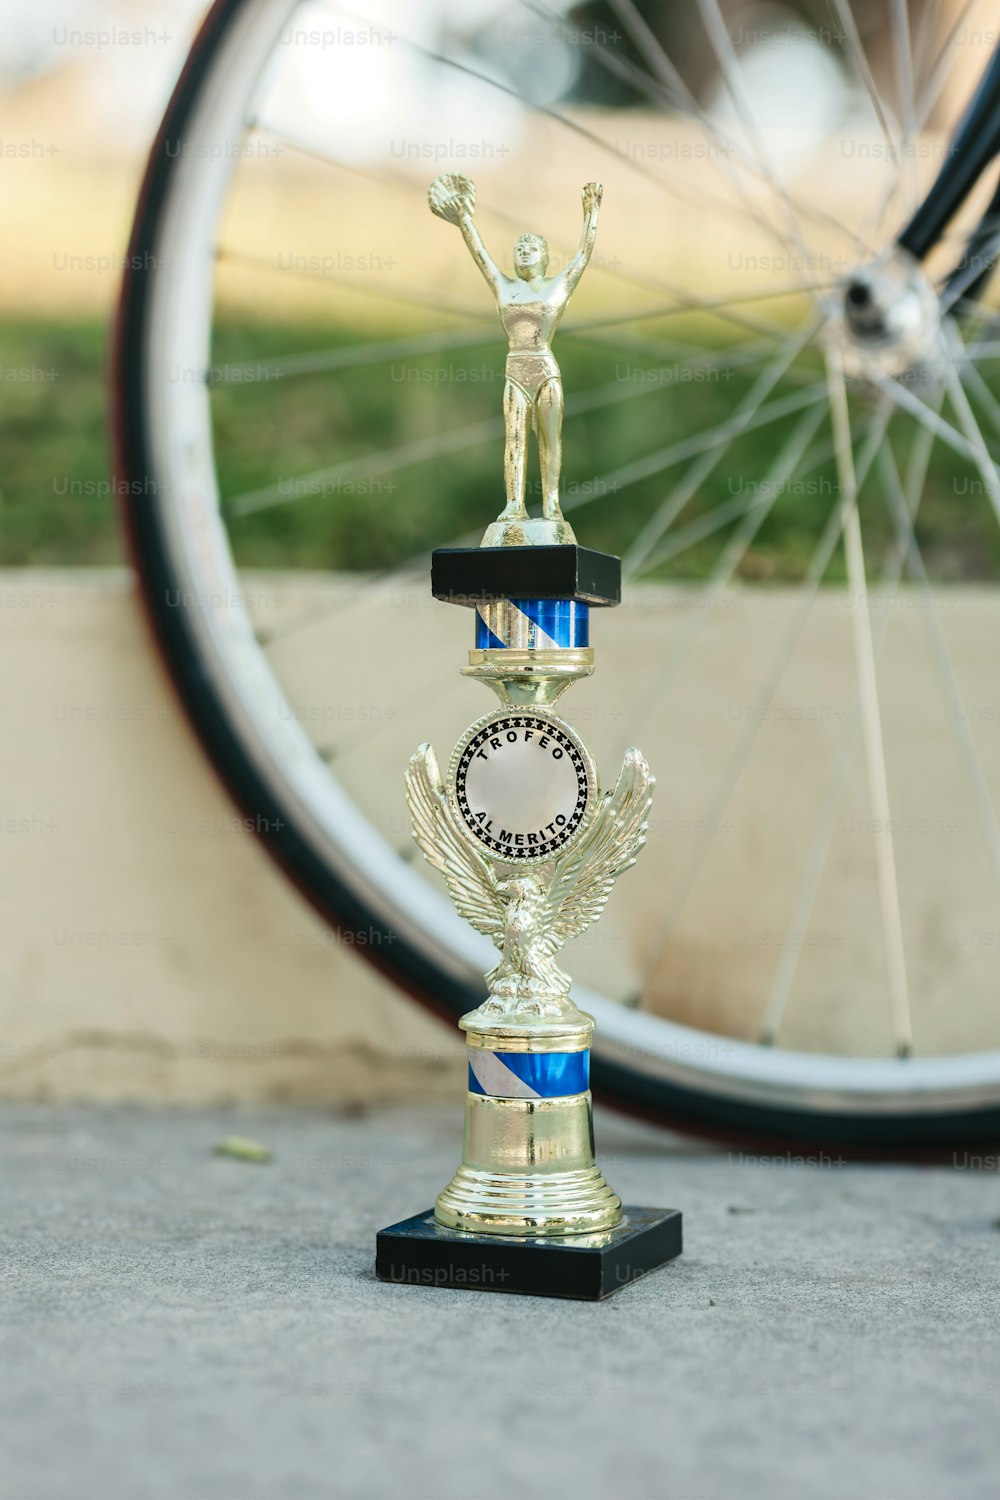 a golden trophy sitting next to a bicycle